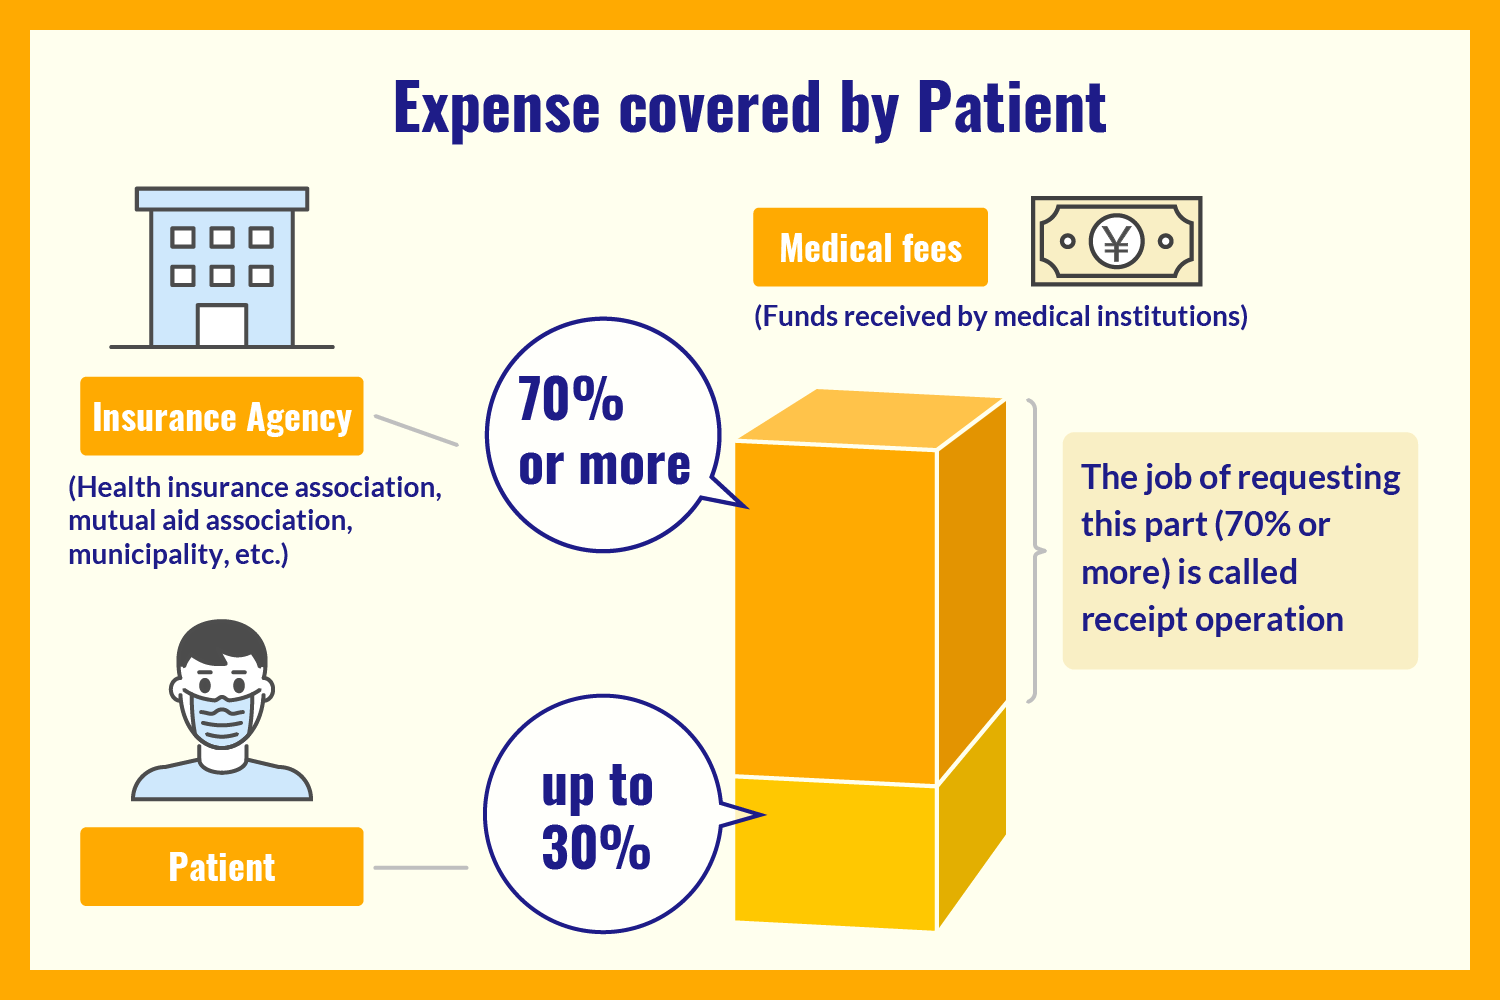 Expense covered by Patient